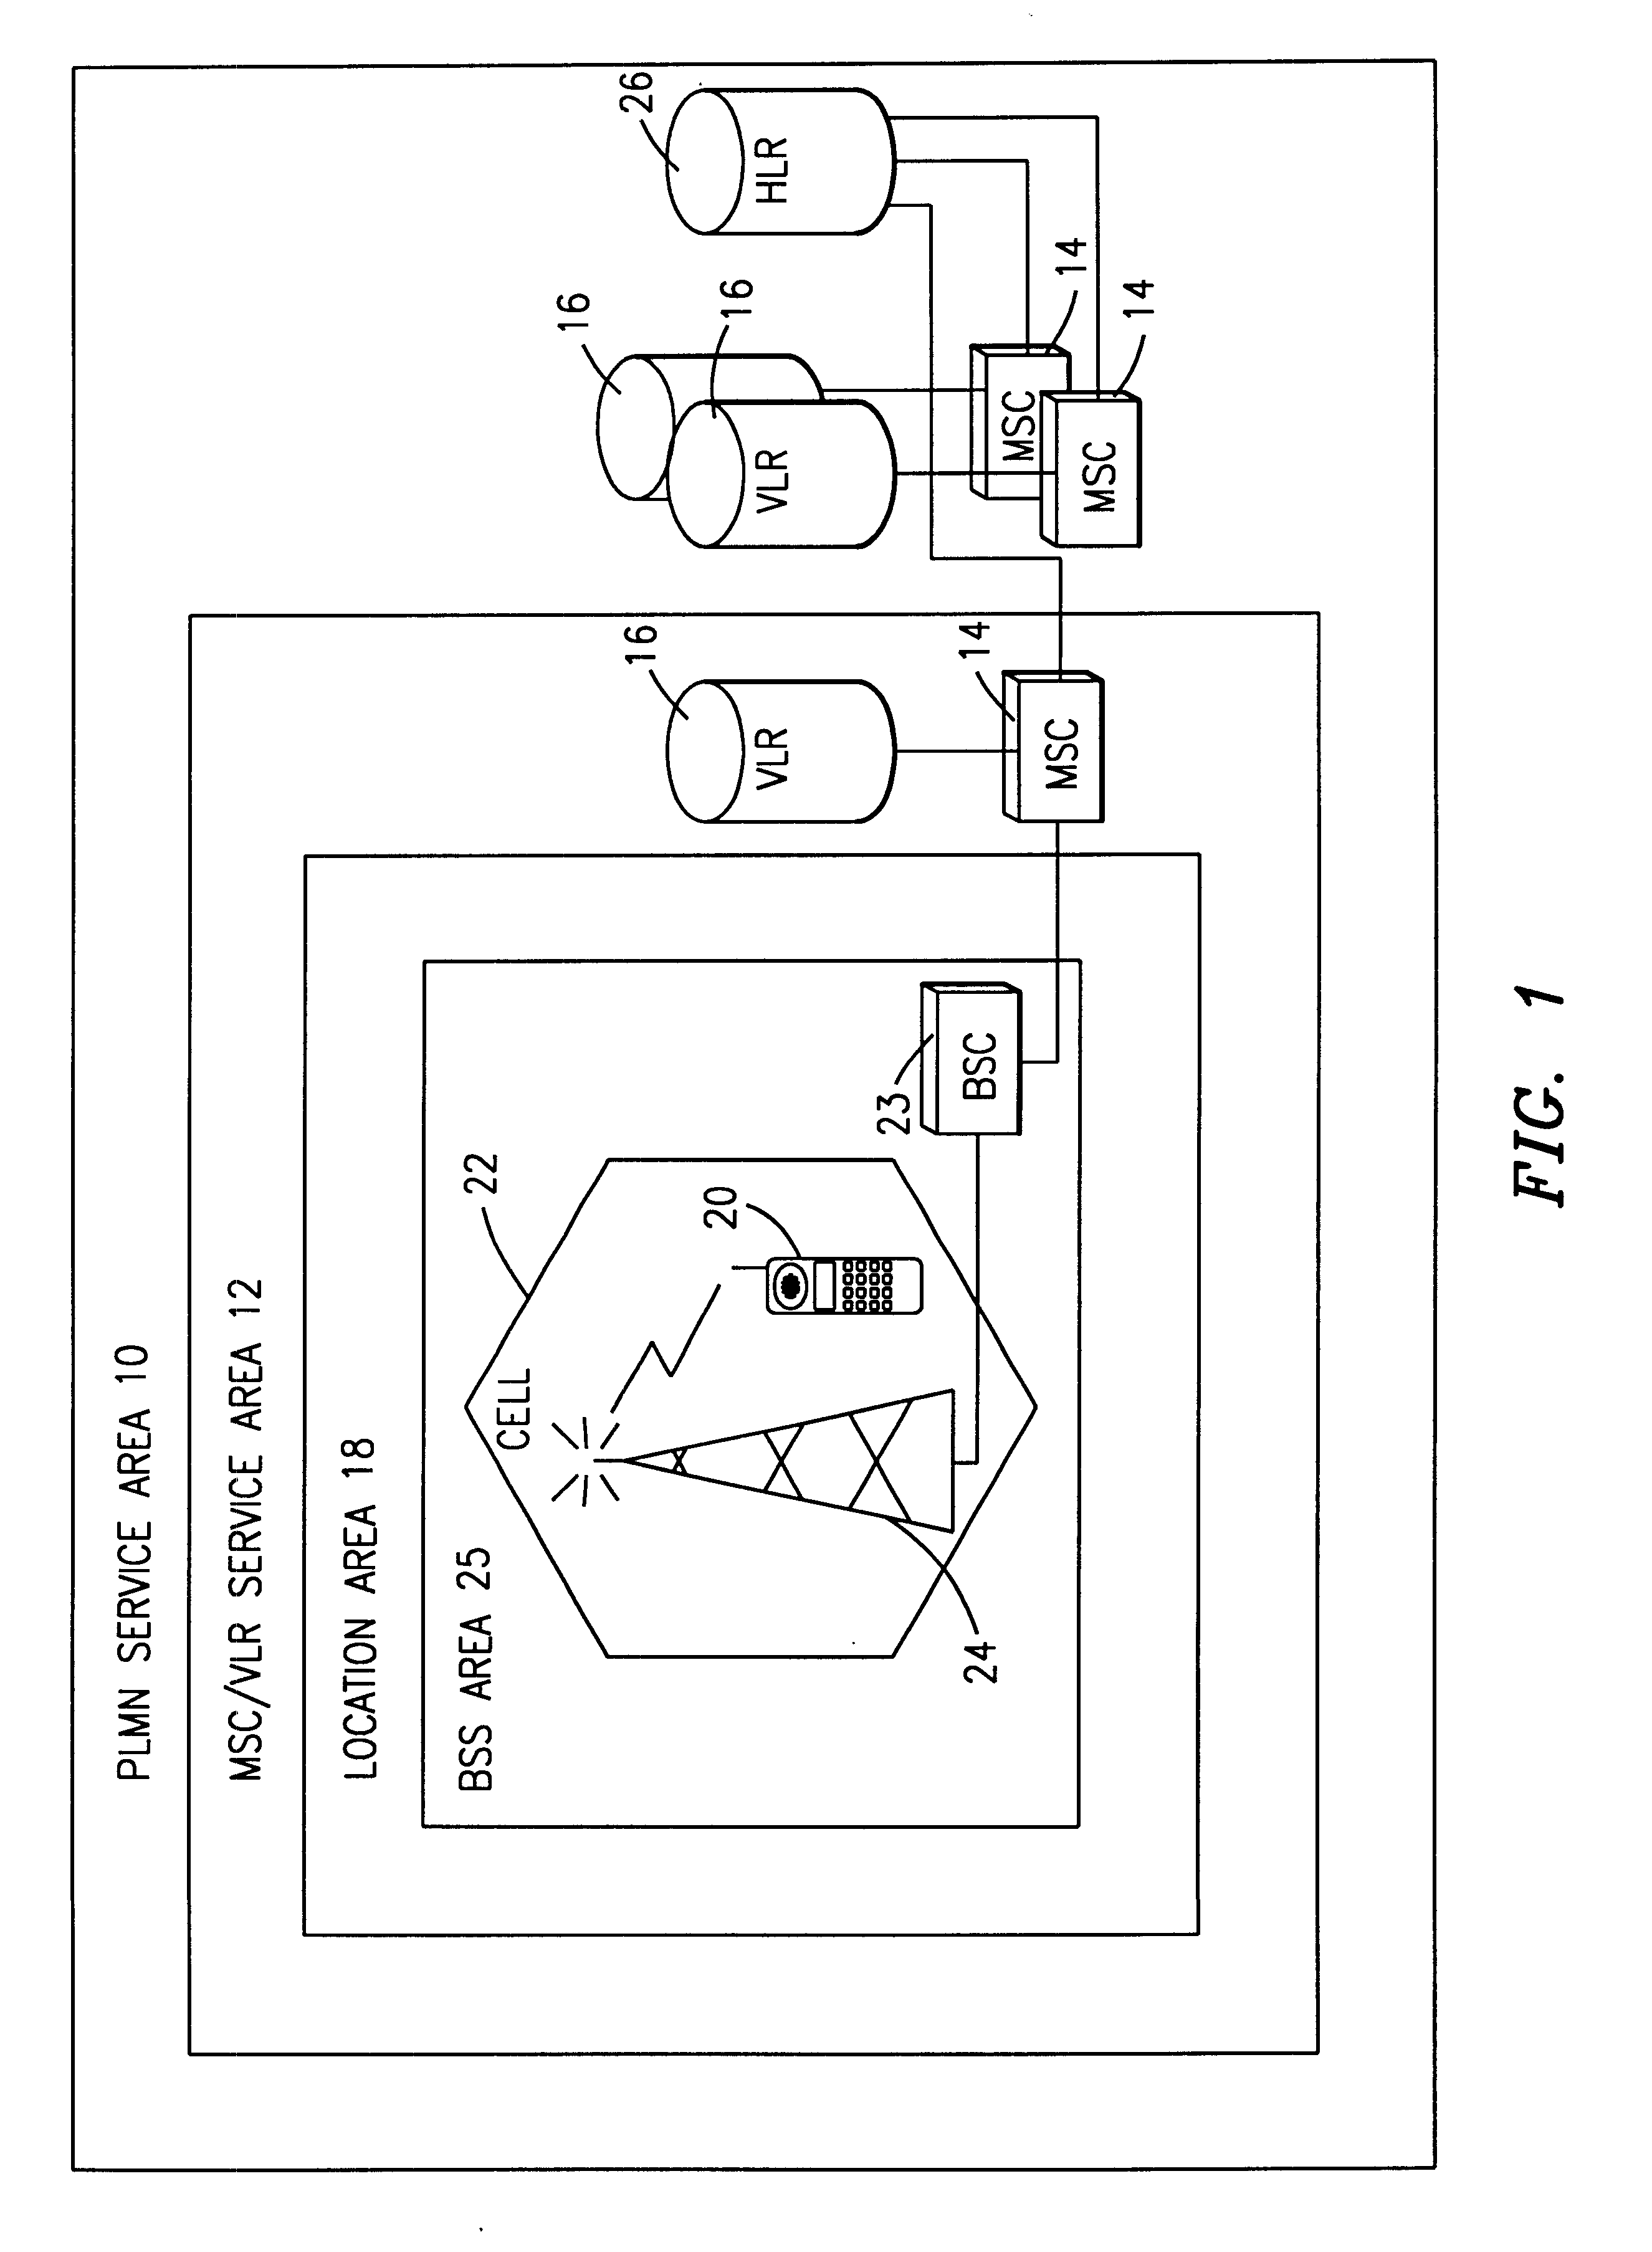 System and method for flash call setup in an internet protocol based cellular network